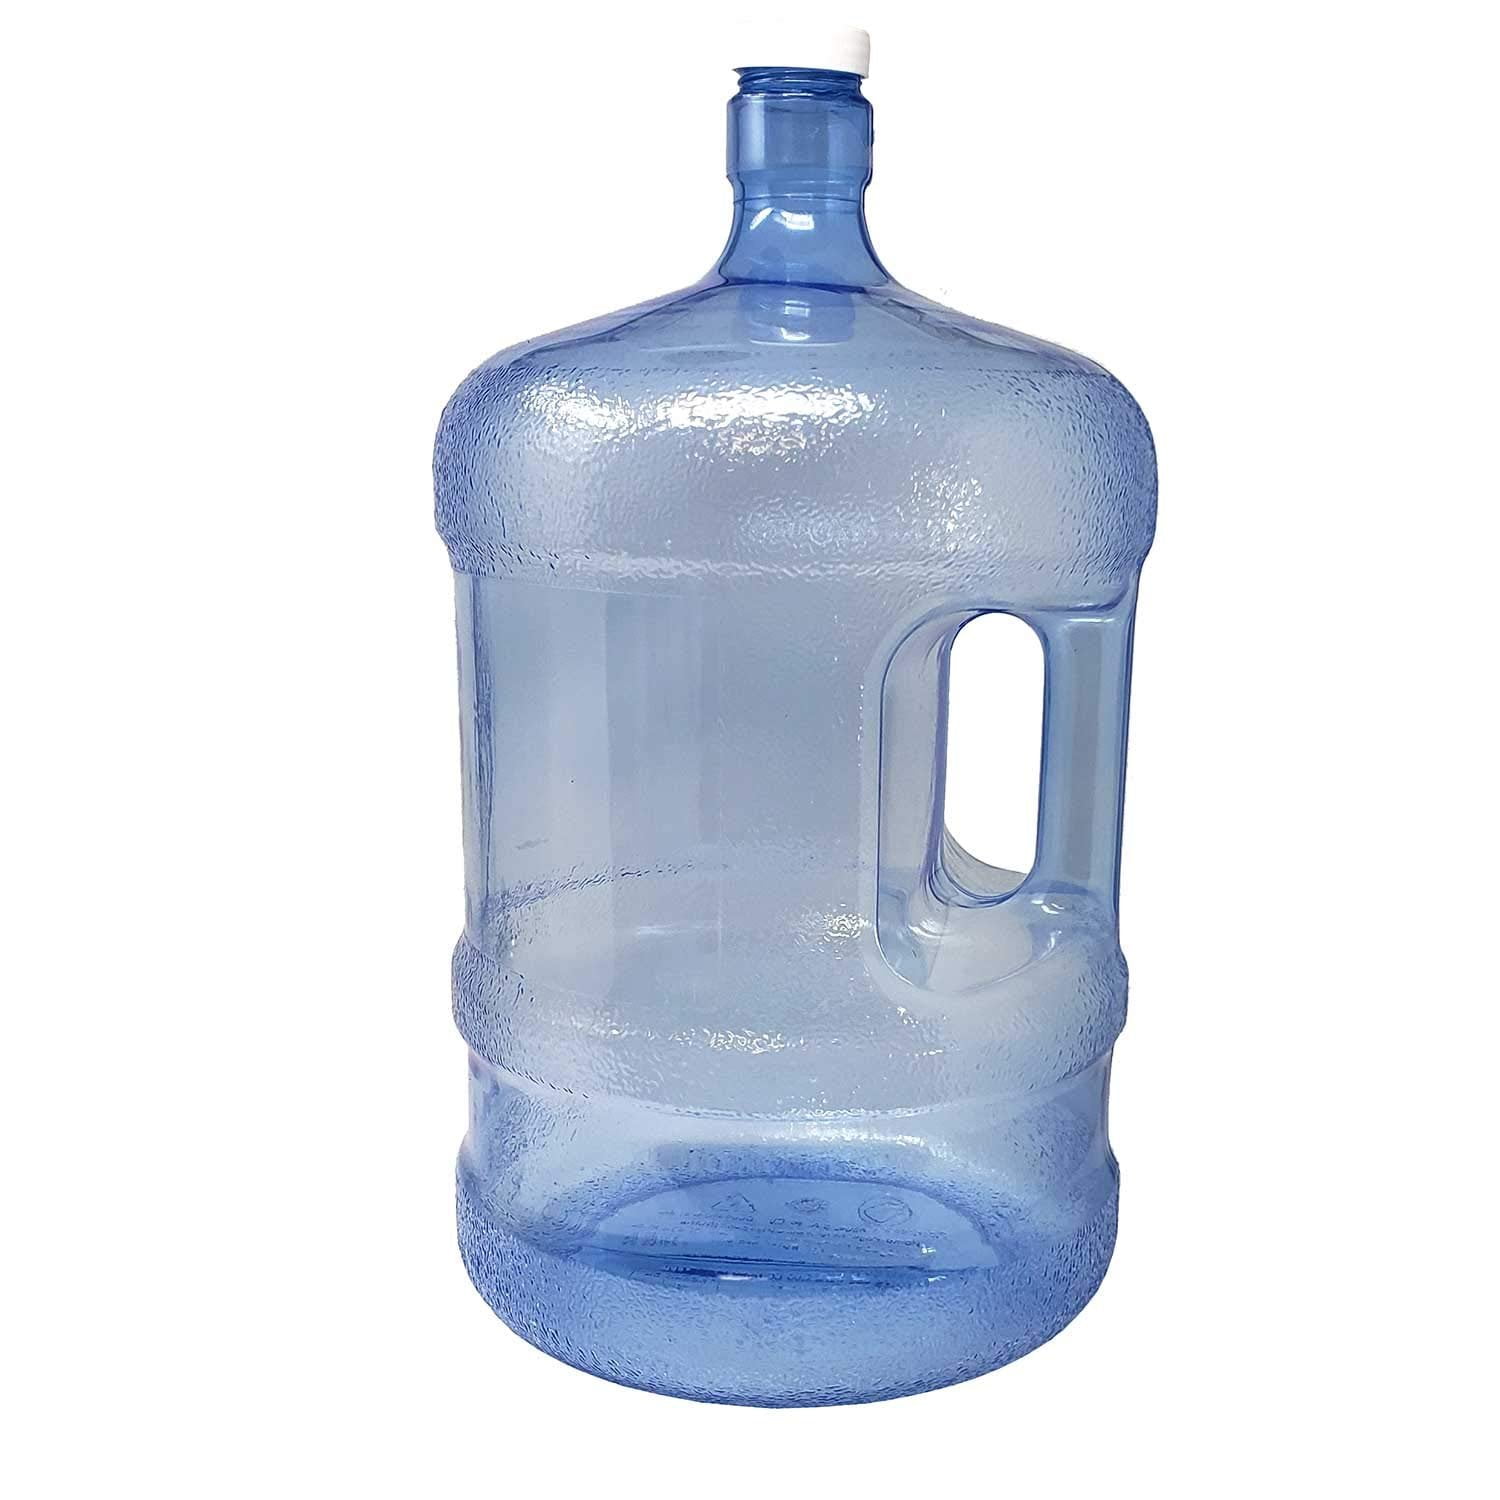 5 Gallon Vitrolero Jug with Lid - Aguas Frescas Plastic Water Container -  Mexican Drink Dispenser - Ideal for Agua fresca and Juice - BPA Free 